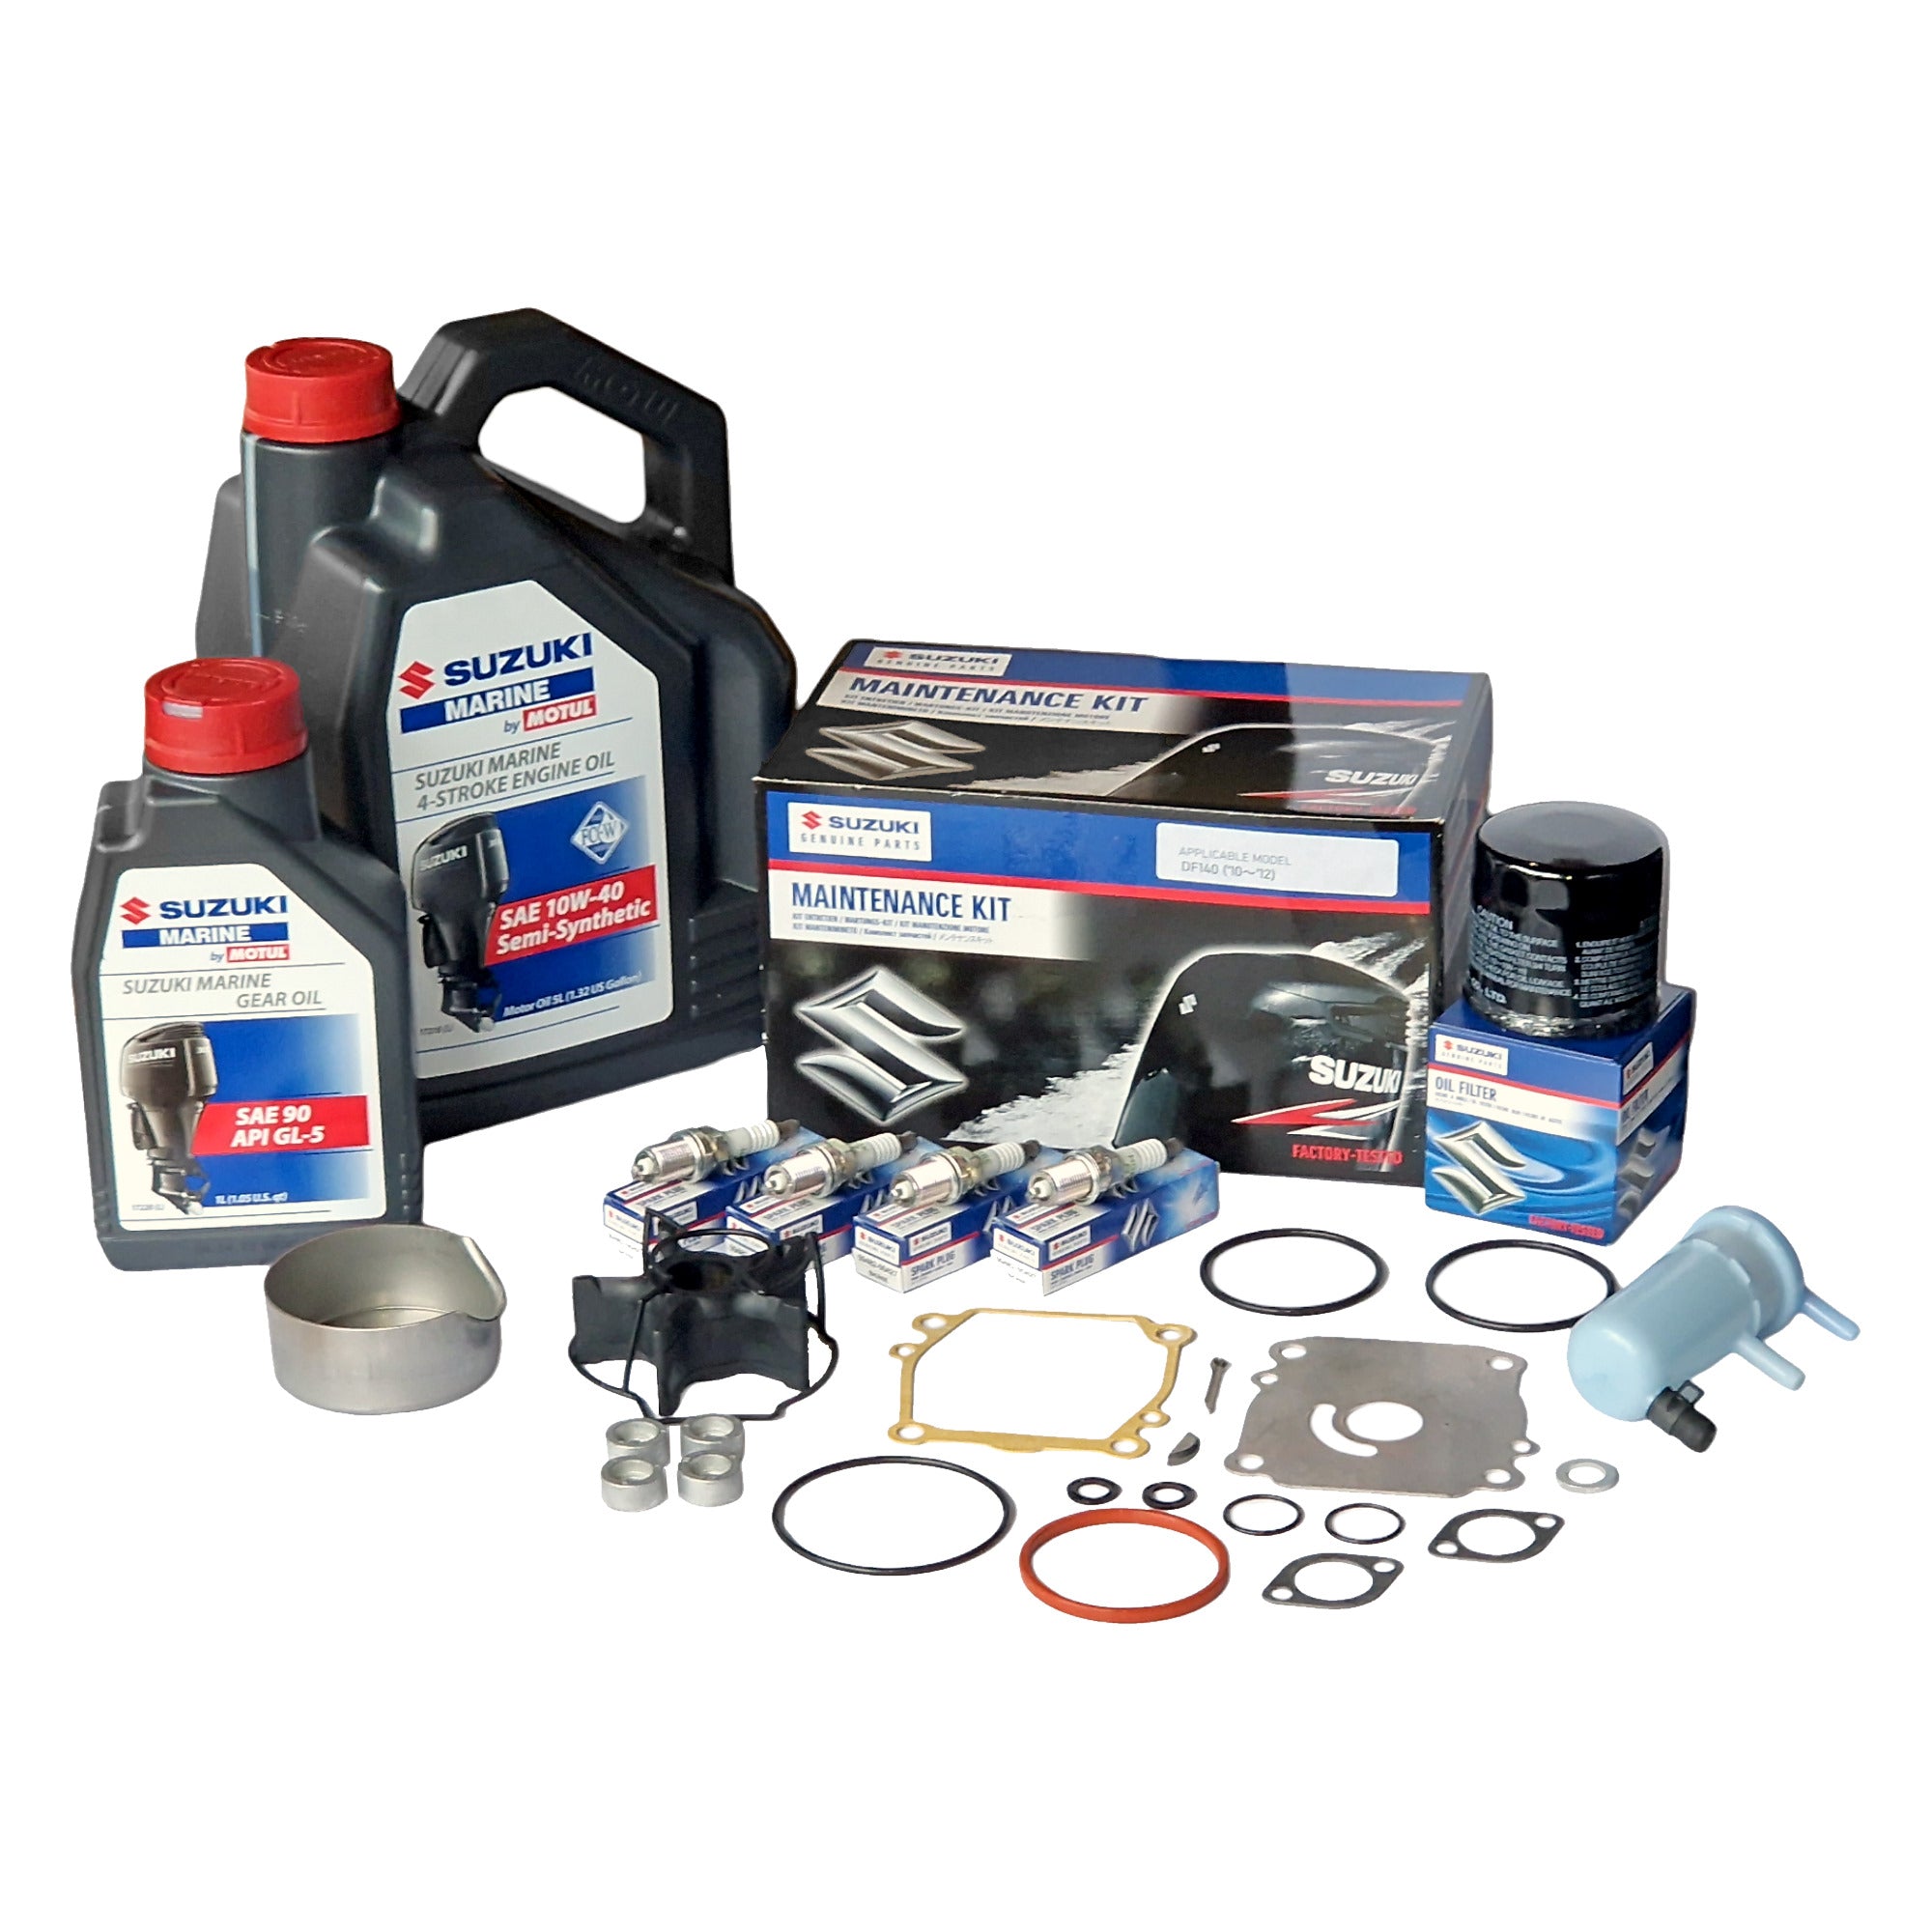 Ultimate Kits for Suzuki Outboards